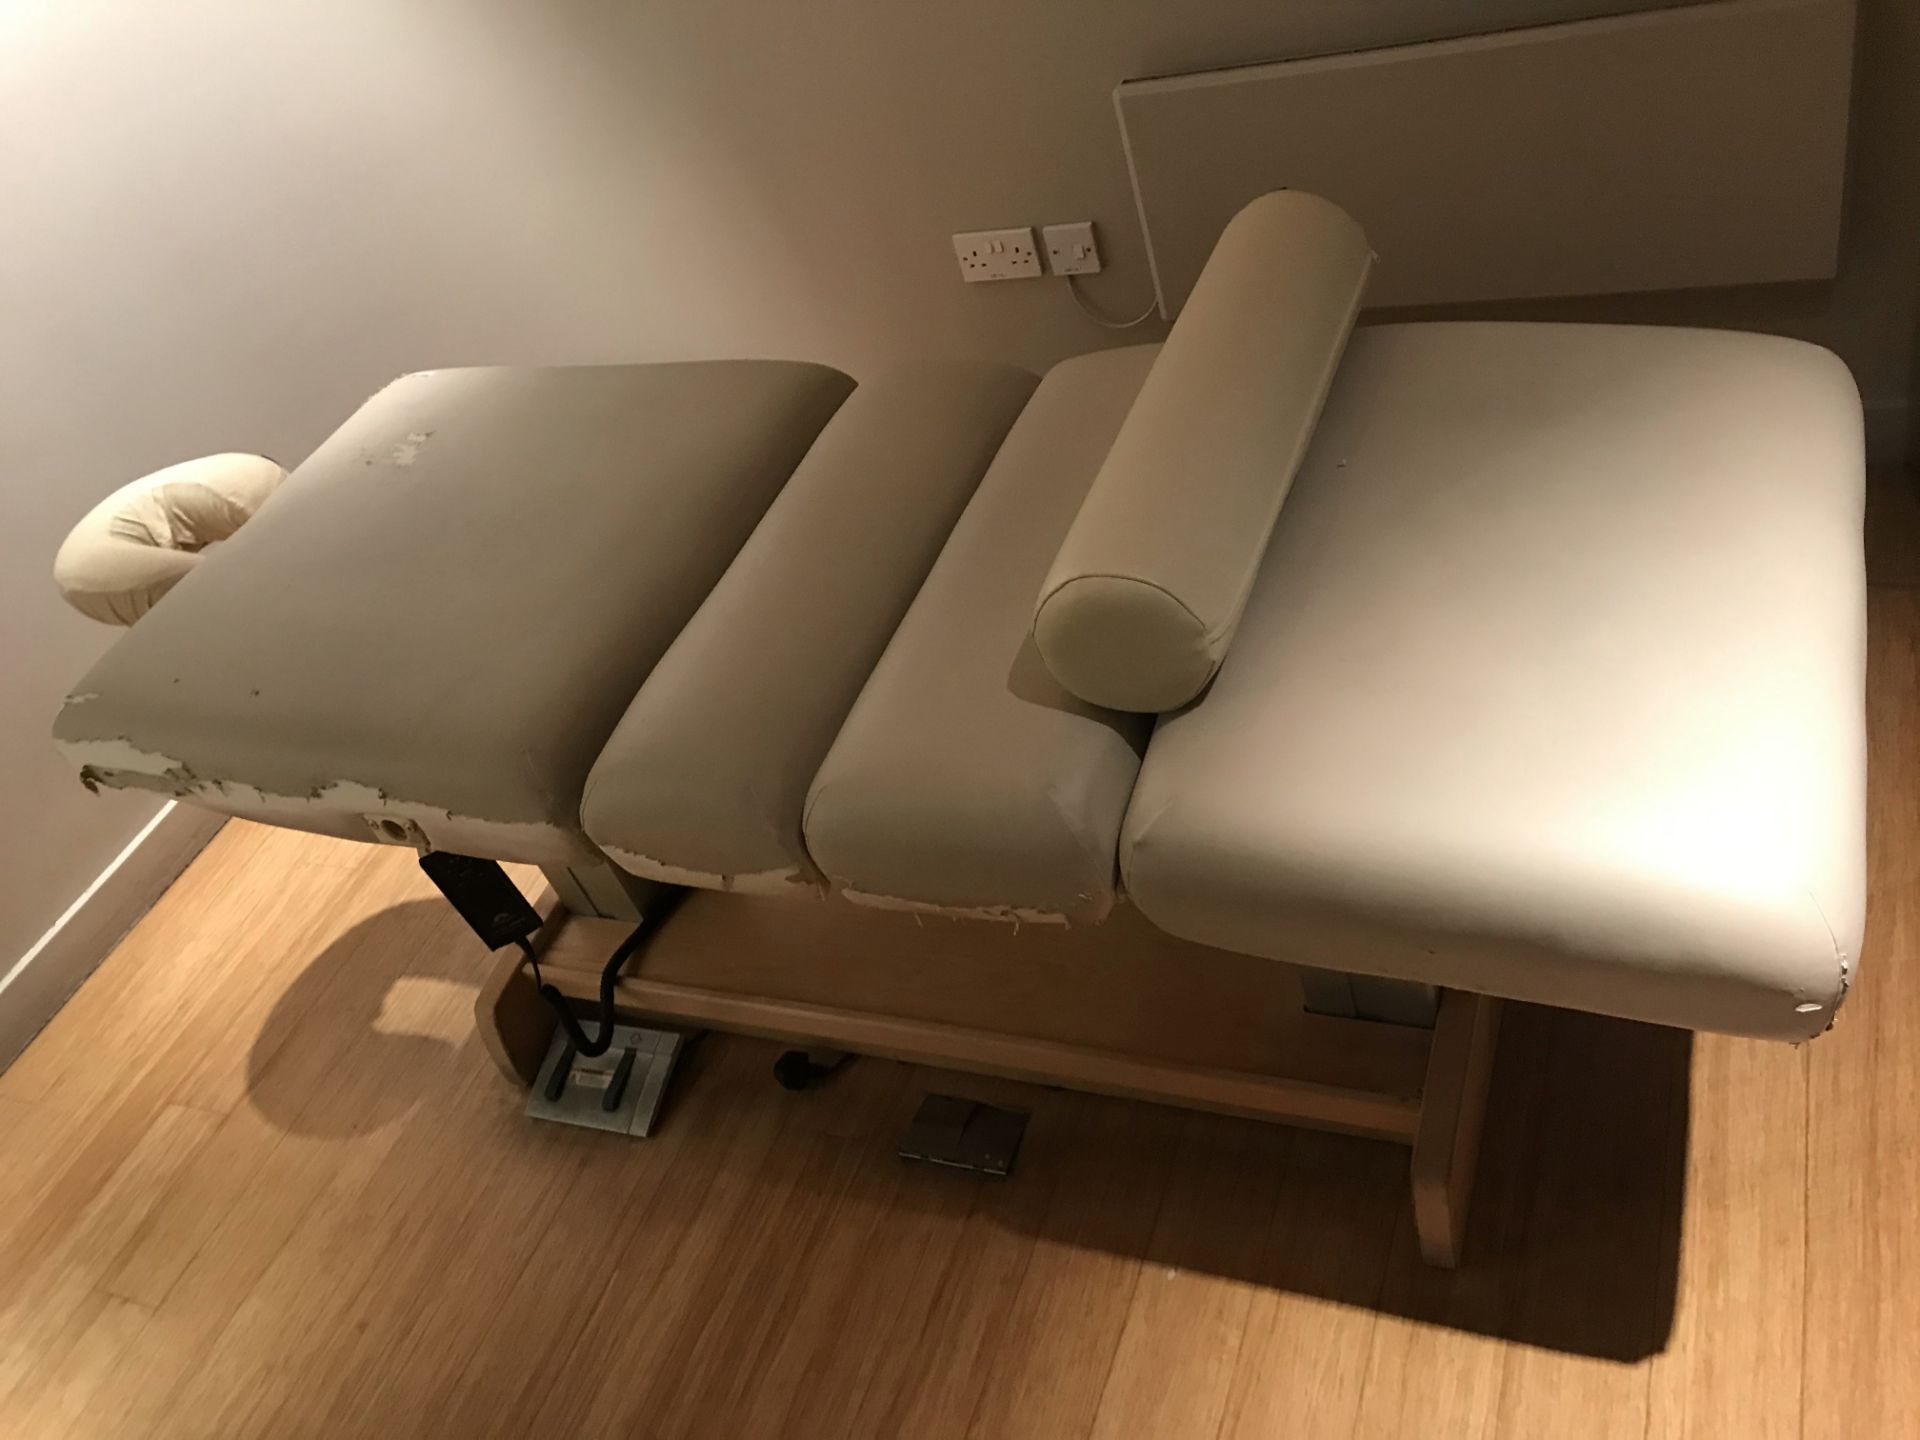 1 x Oakworks Clinician Electric-Hydraulic Massage Table With Footpedal and Linak HBWO Remote Control - Image 3 of 11